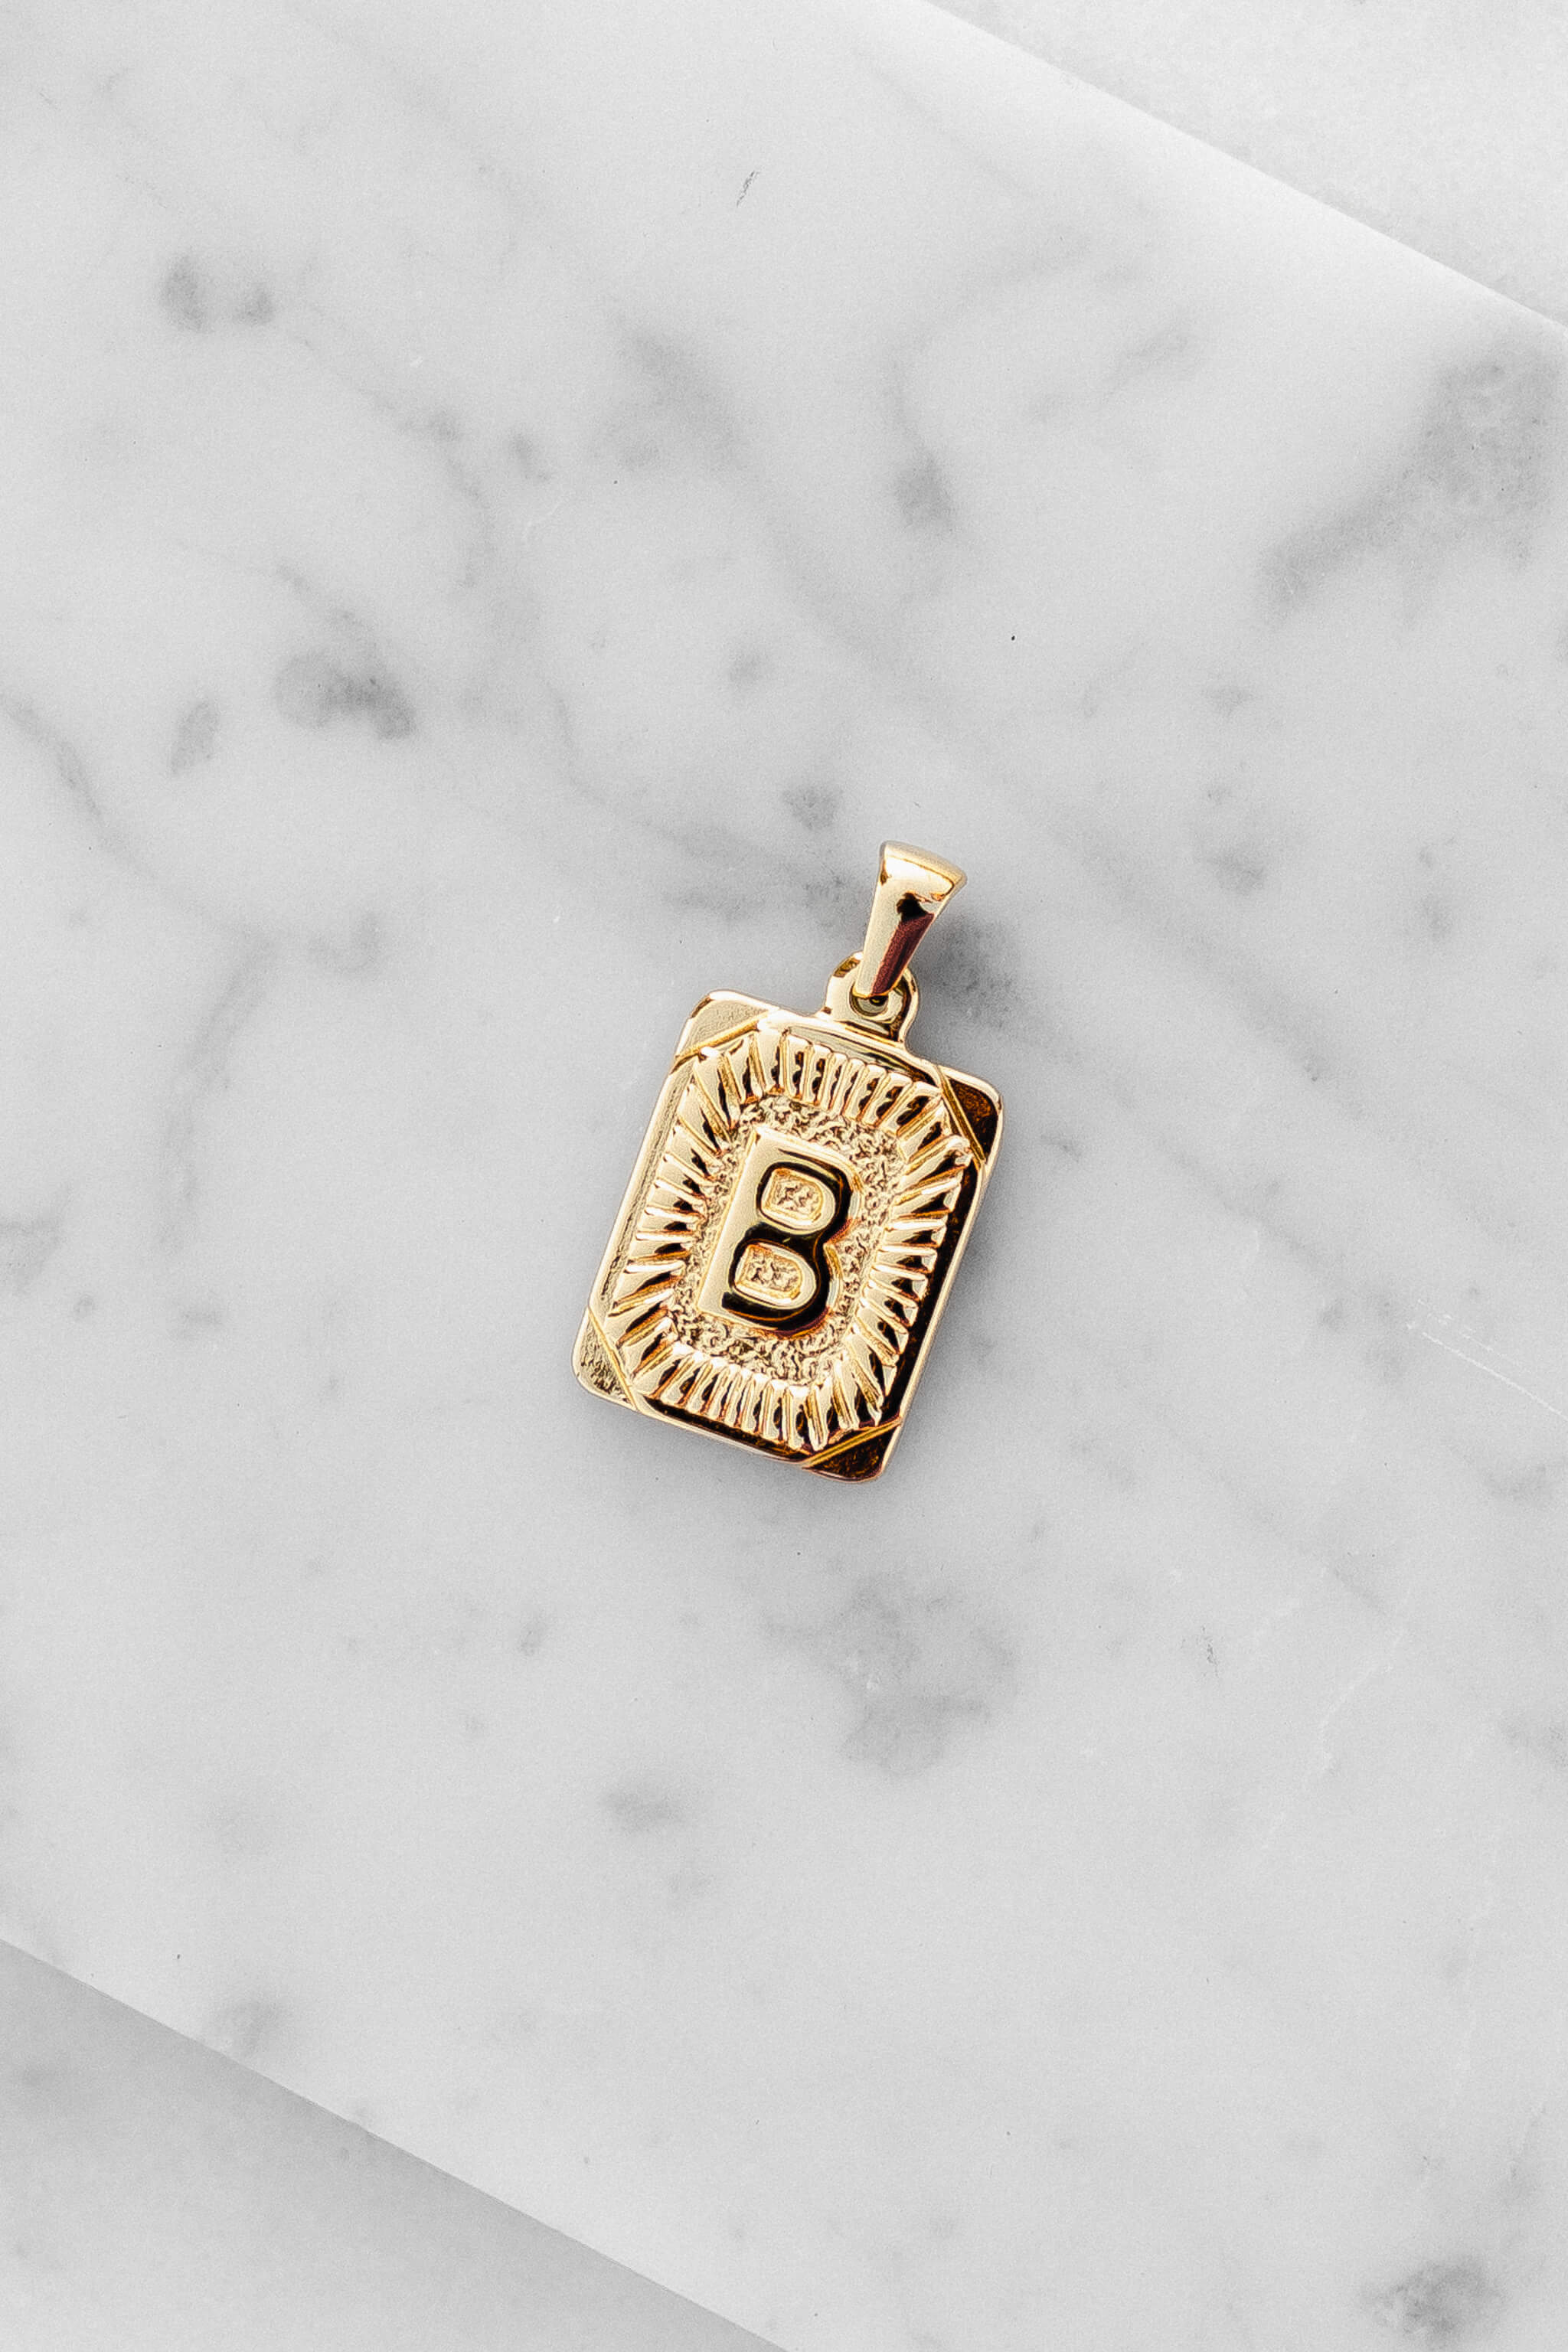 Gold Monogram Letter "B" Charm laying on a marble